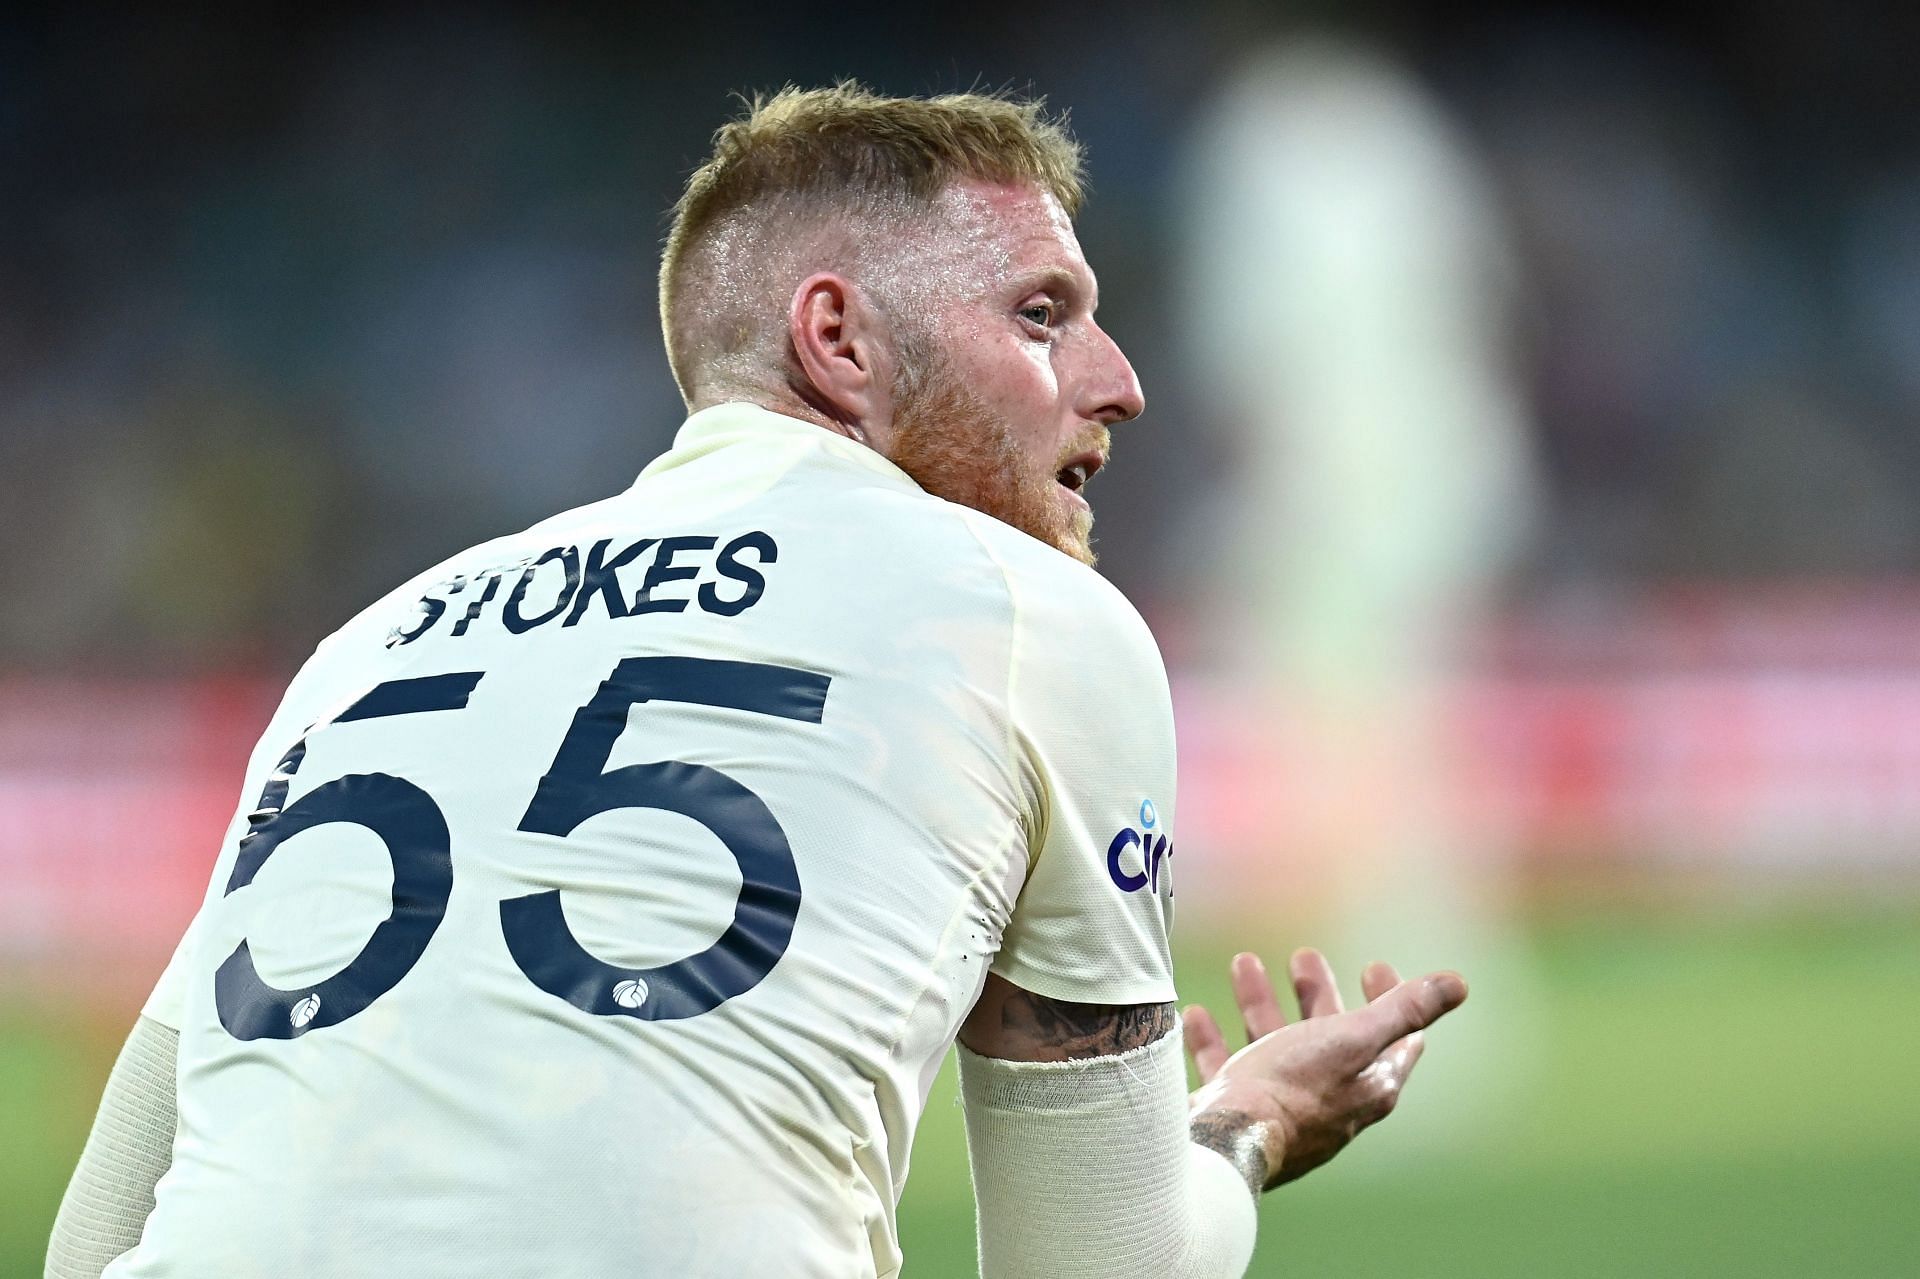  Ben Stokes. (Image Credits: Getty)